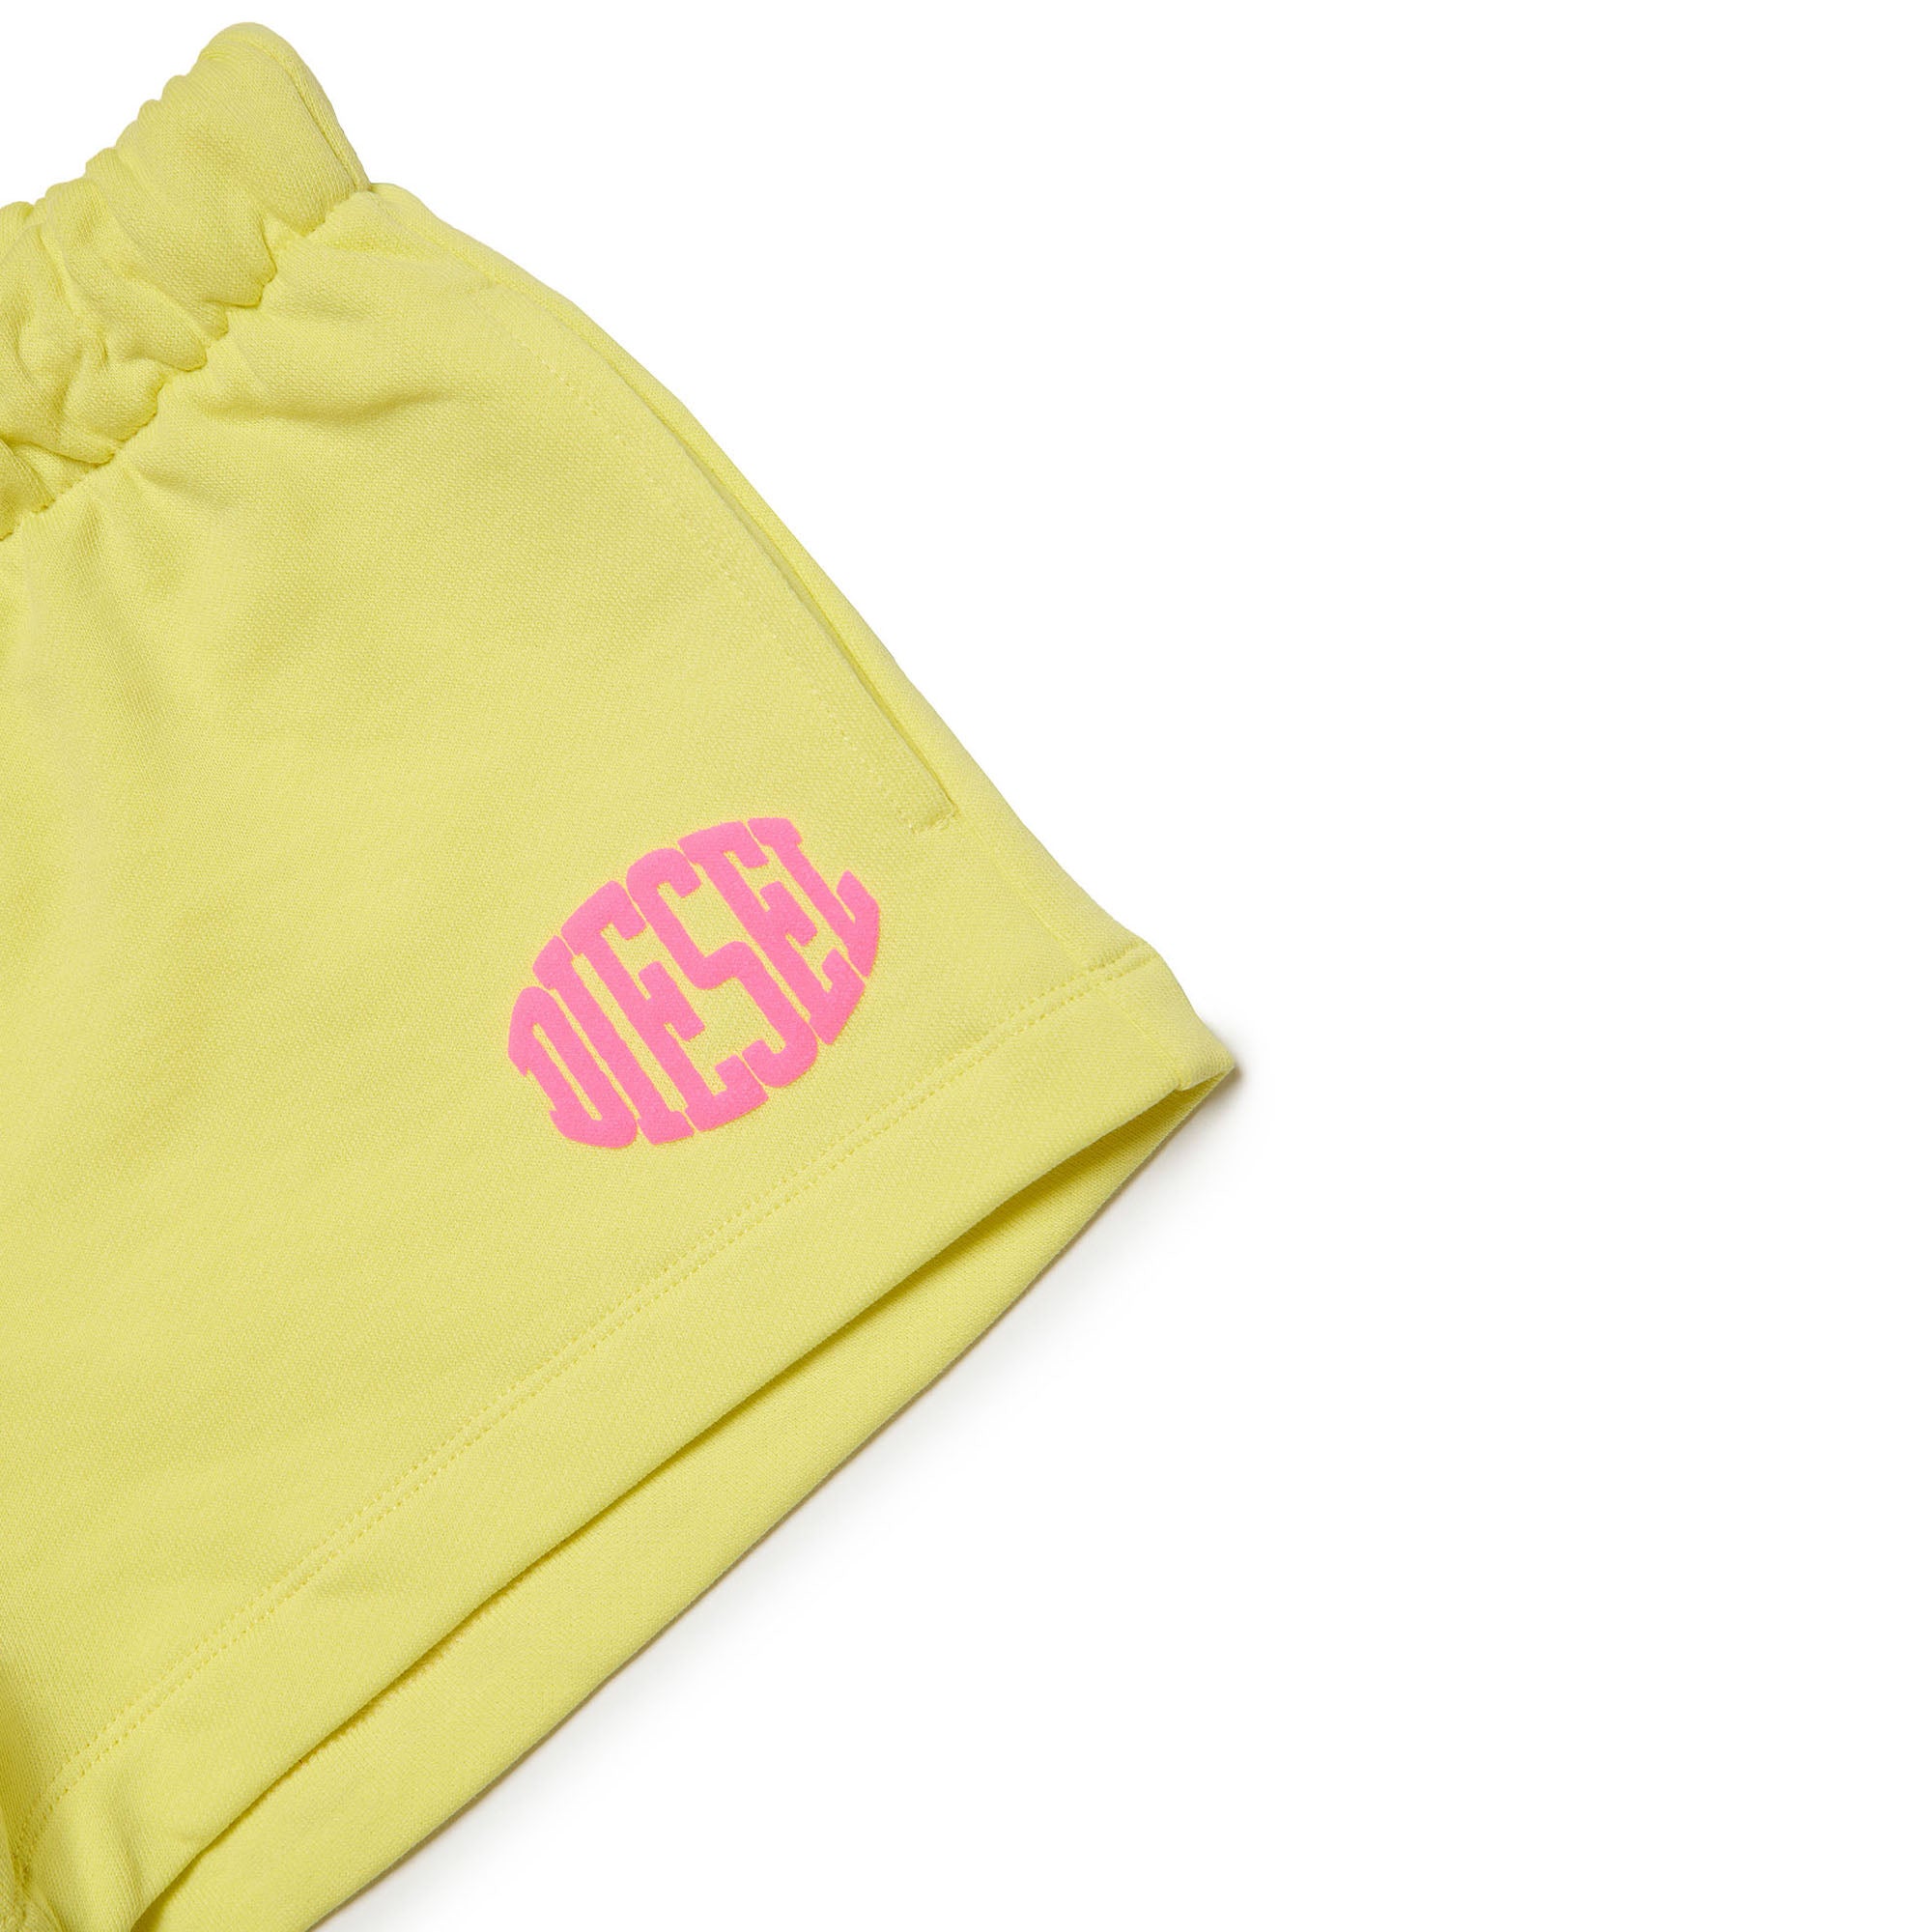 Diesel Paglife Yellow Shorts